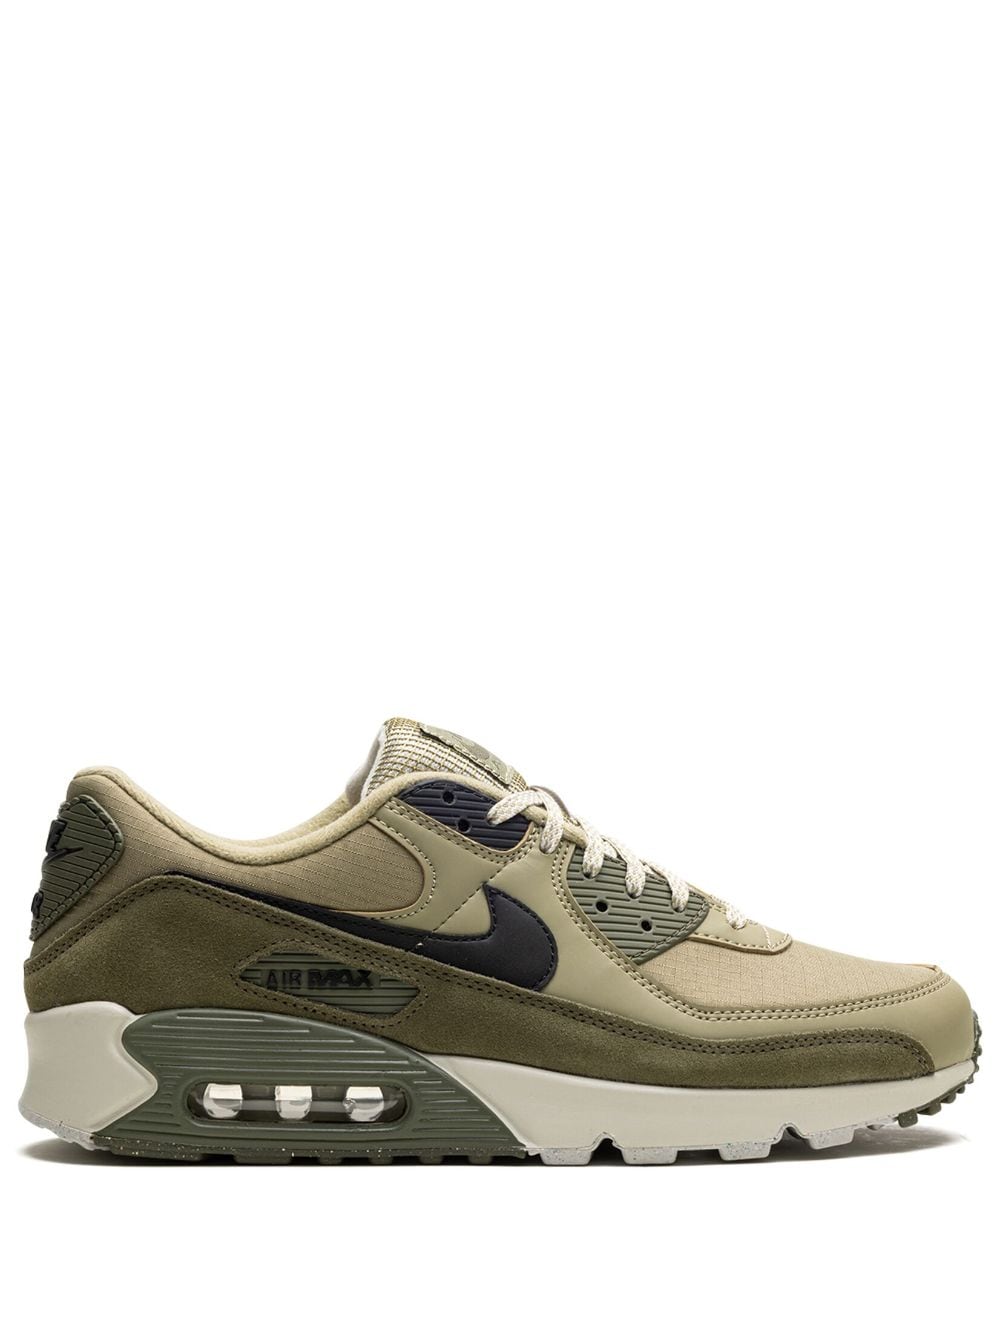 Image 1 of Nike Air Max 90 "Neutral Olive" sneakers